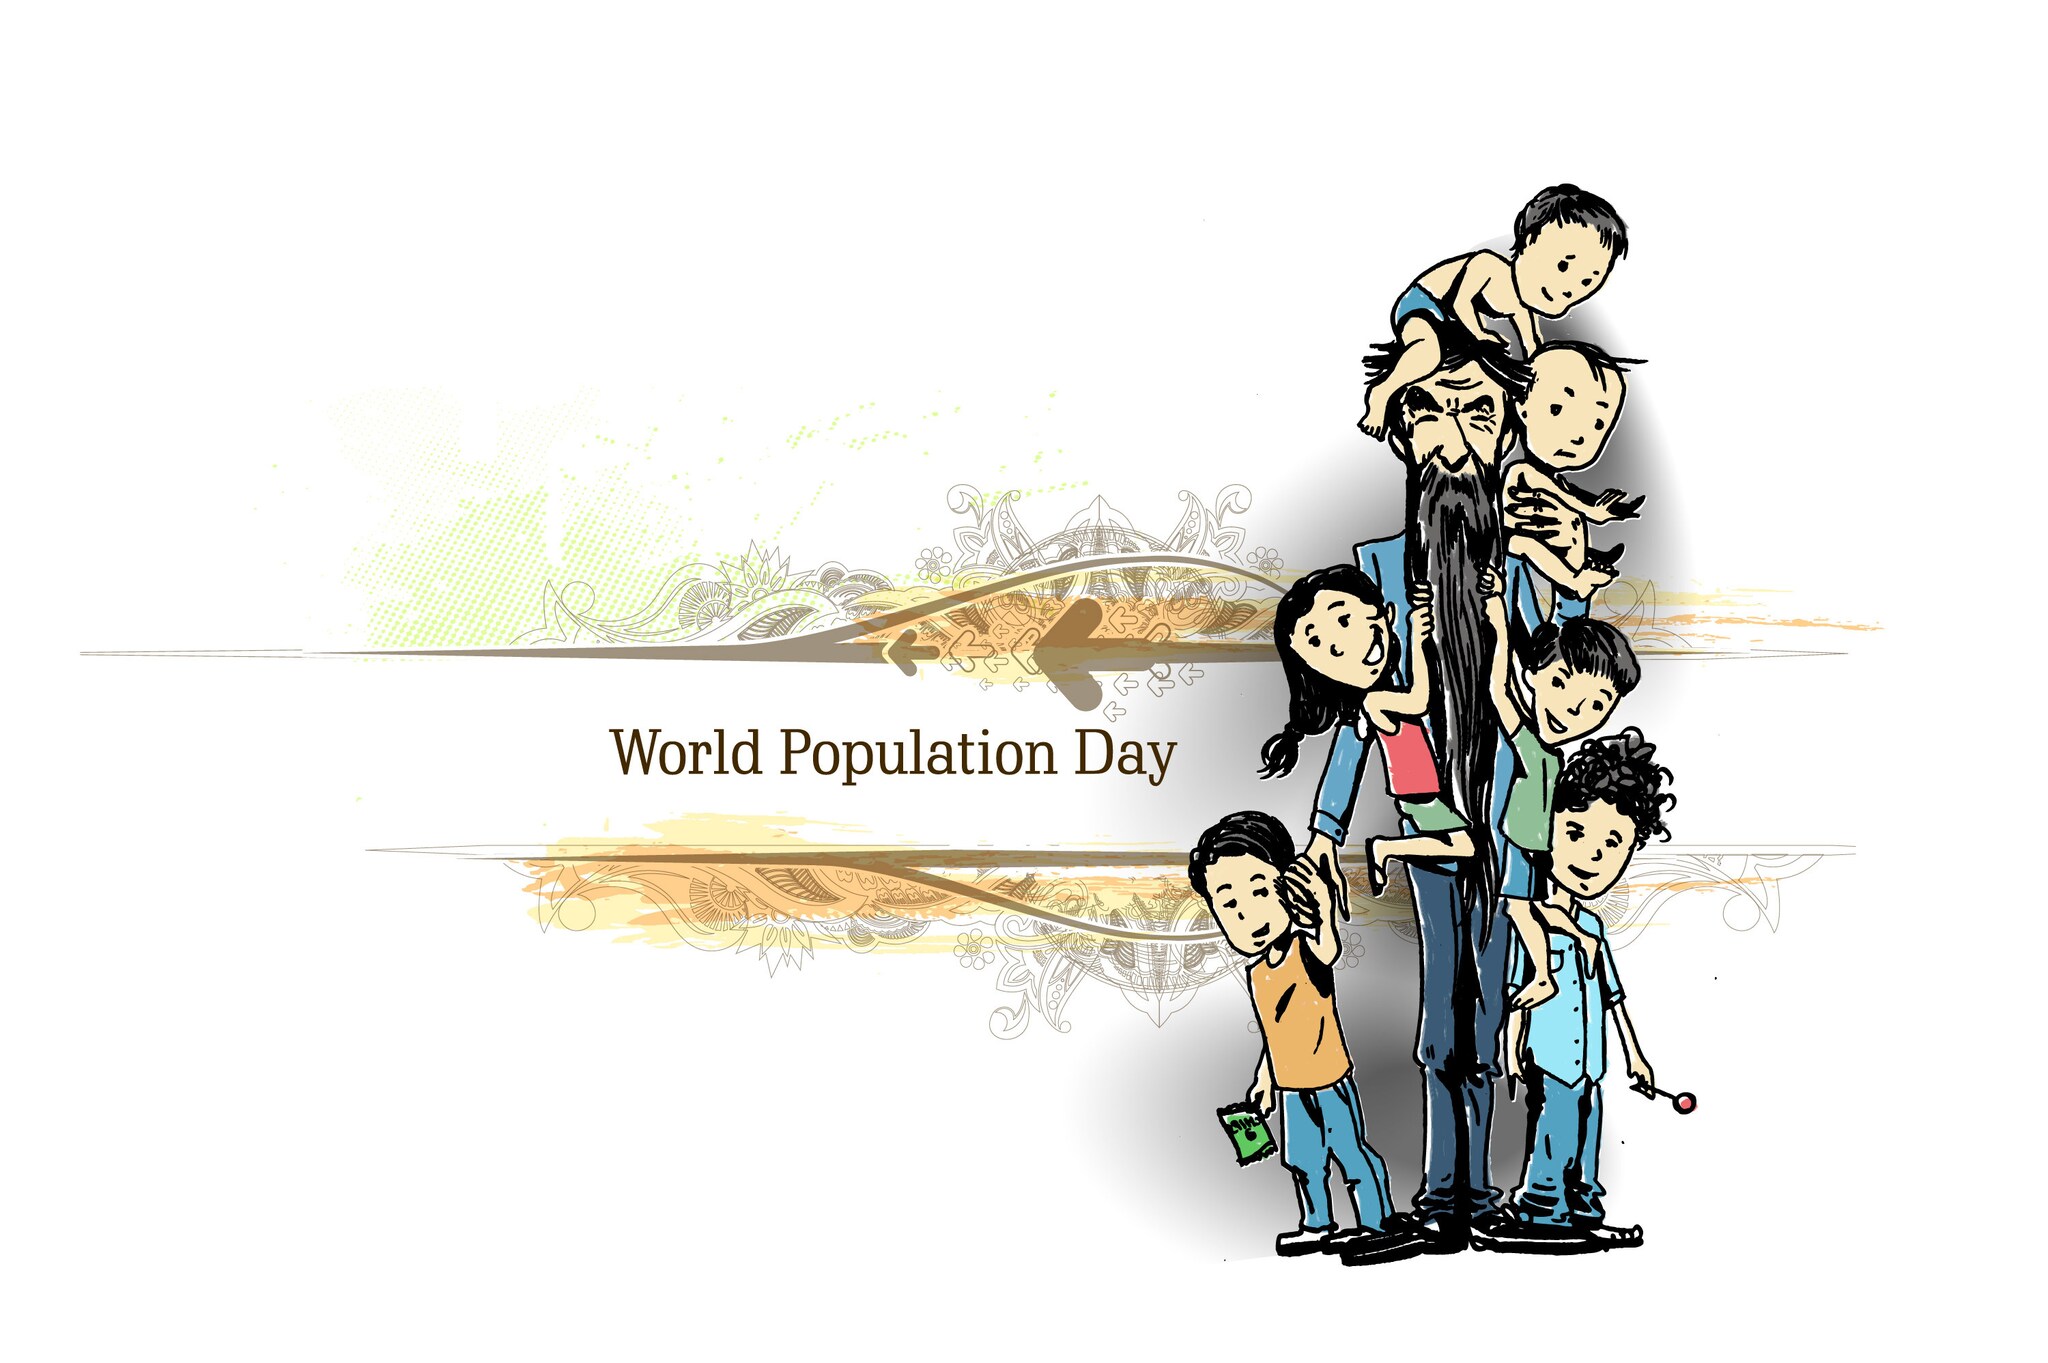 World Population Day 2022 Wishes, Greetings, Whatsapp Status, Images and Quotes you can share with your loved ones on Eid al-Adha.  (Image: Shutterstock) 